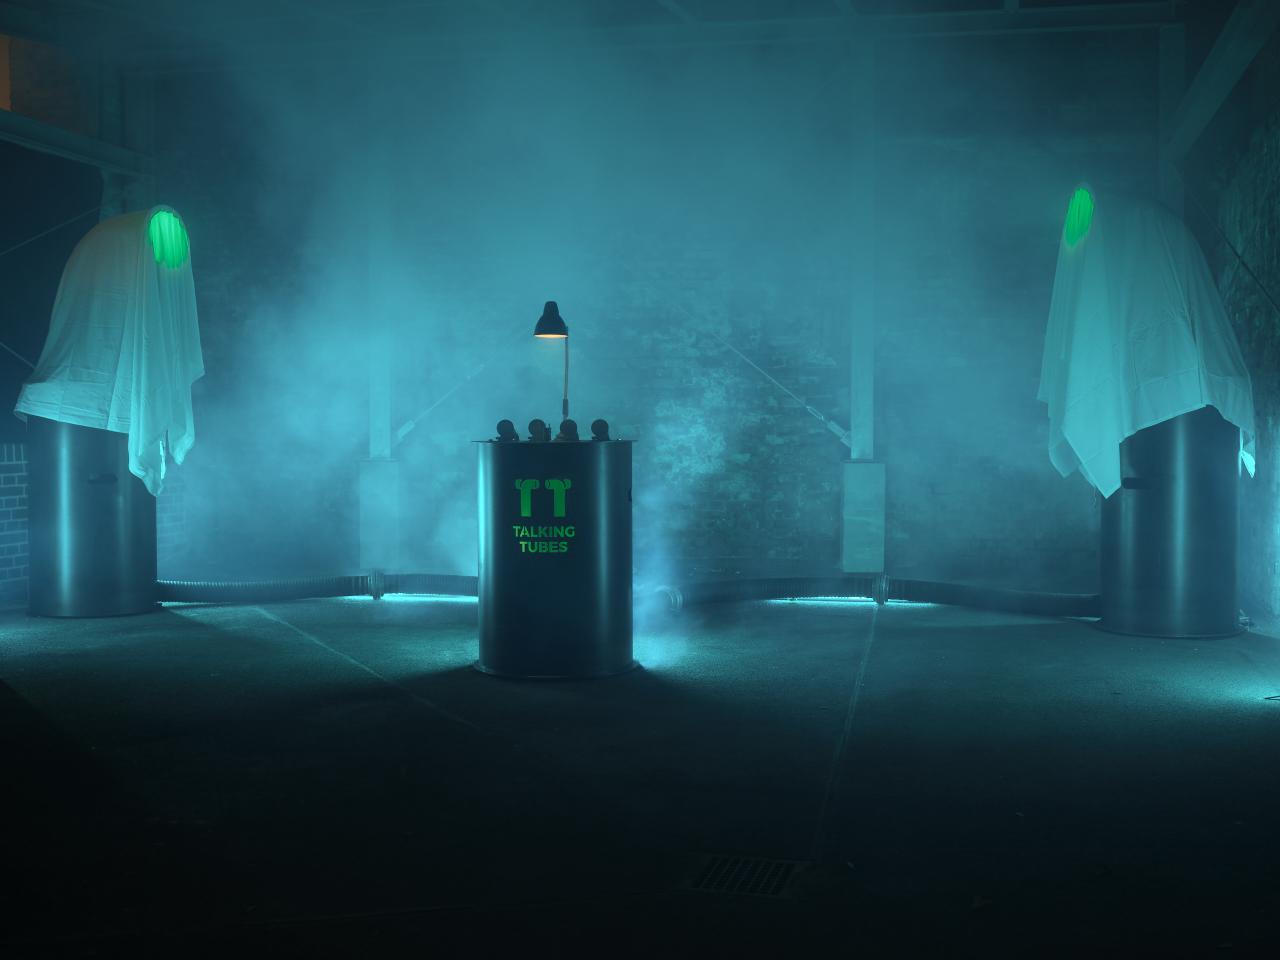 A blue-lit, foggy room with the Talking Tubes installation: a control panel between two large tubes covered by white blankets